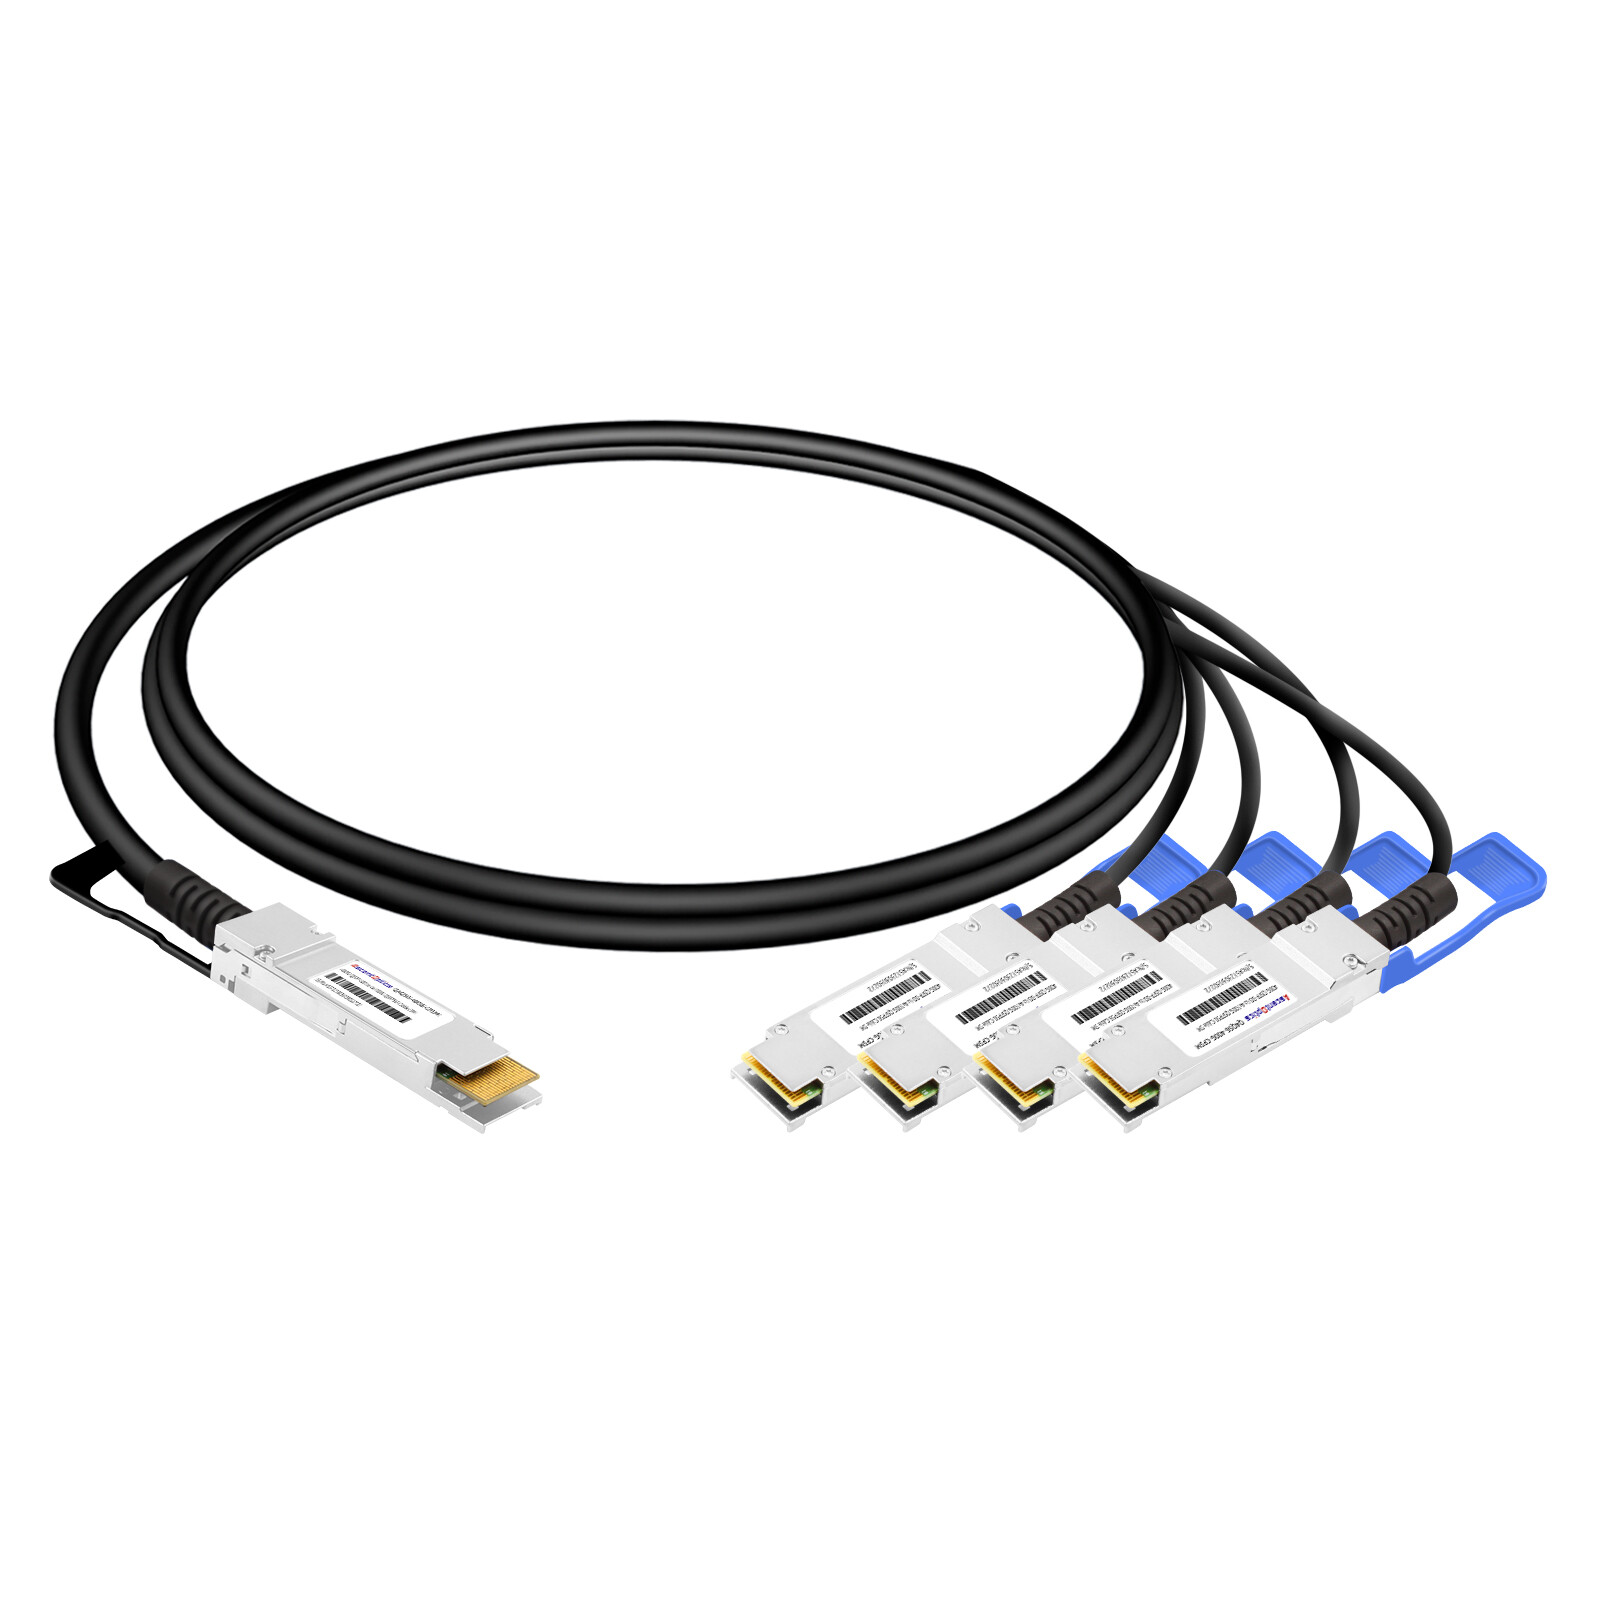 400G QSFP-DD to 4x 100G QSFP56 Copper Breakout Cable,3 Meters,Passive